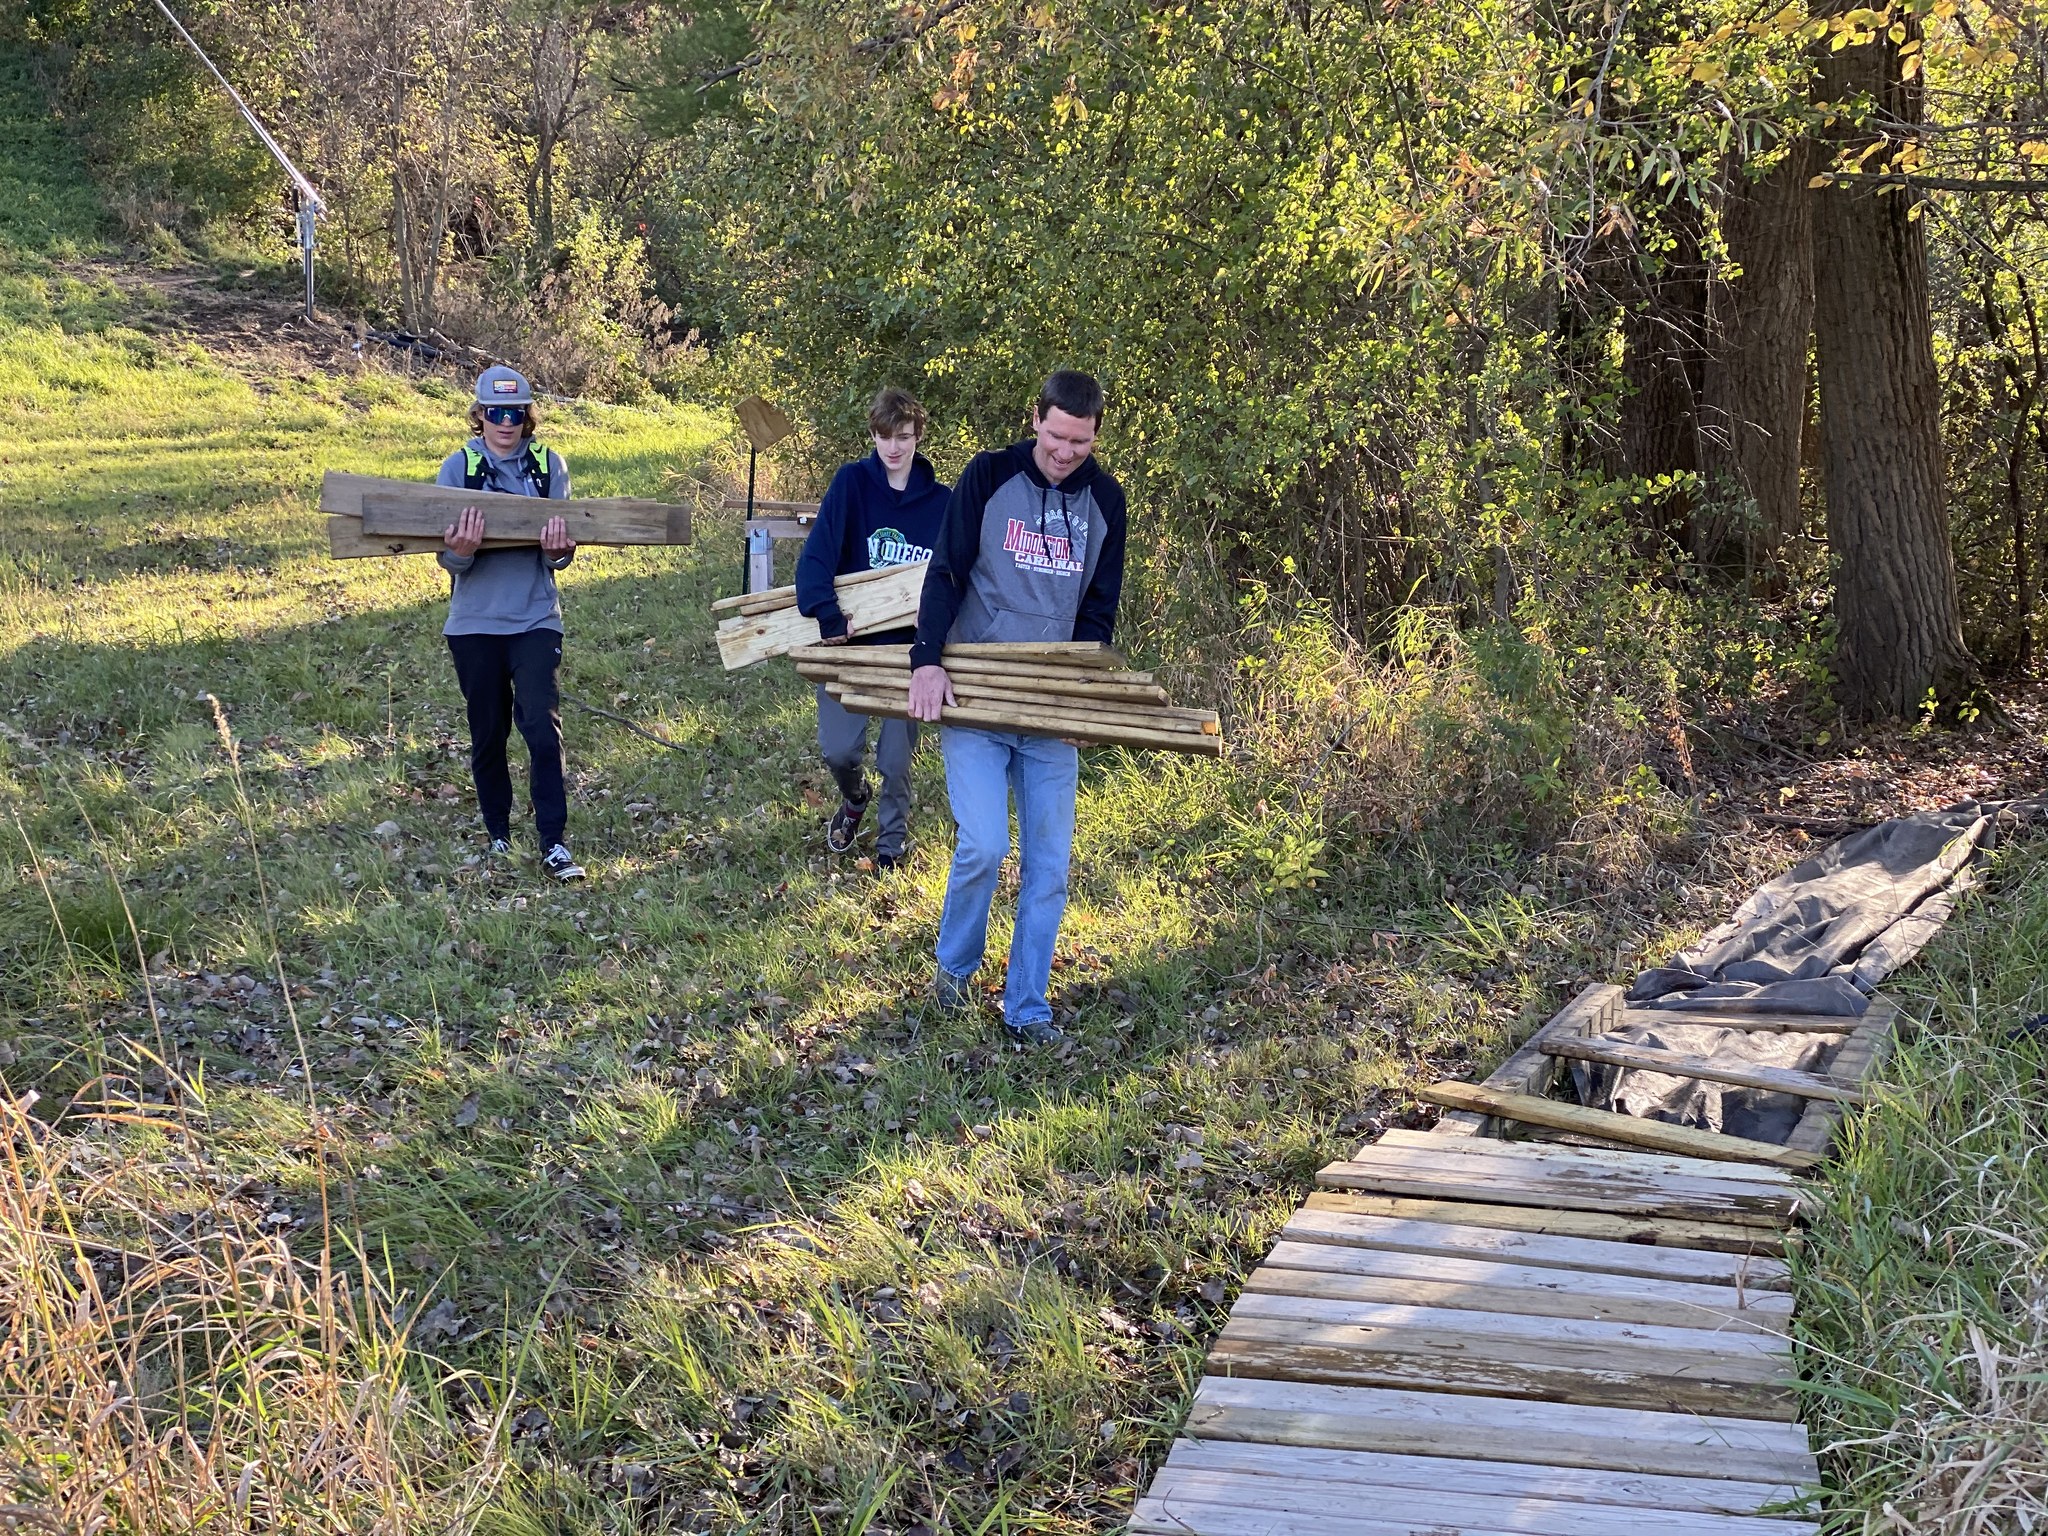 Three people carrying wooden planks on a grassy path next to a partially constructed wooden walkway in a wooded area.